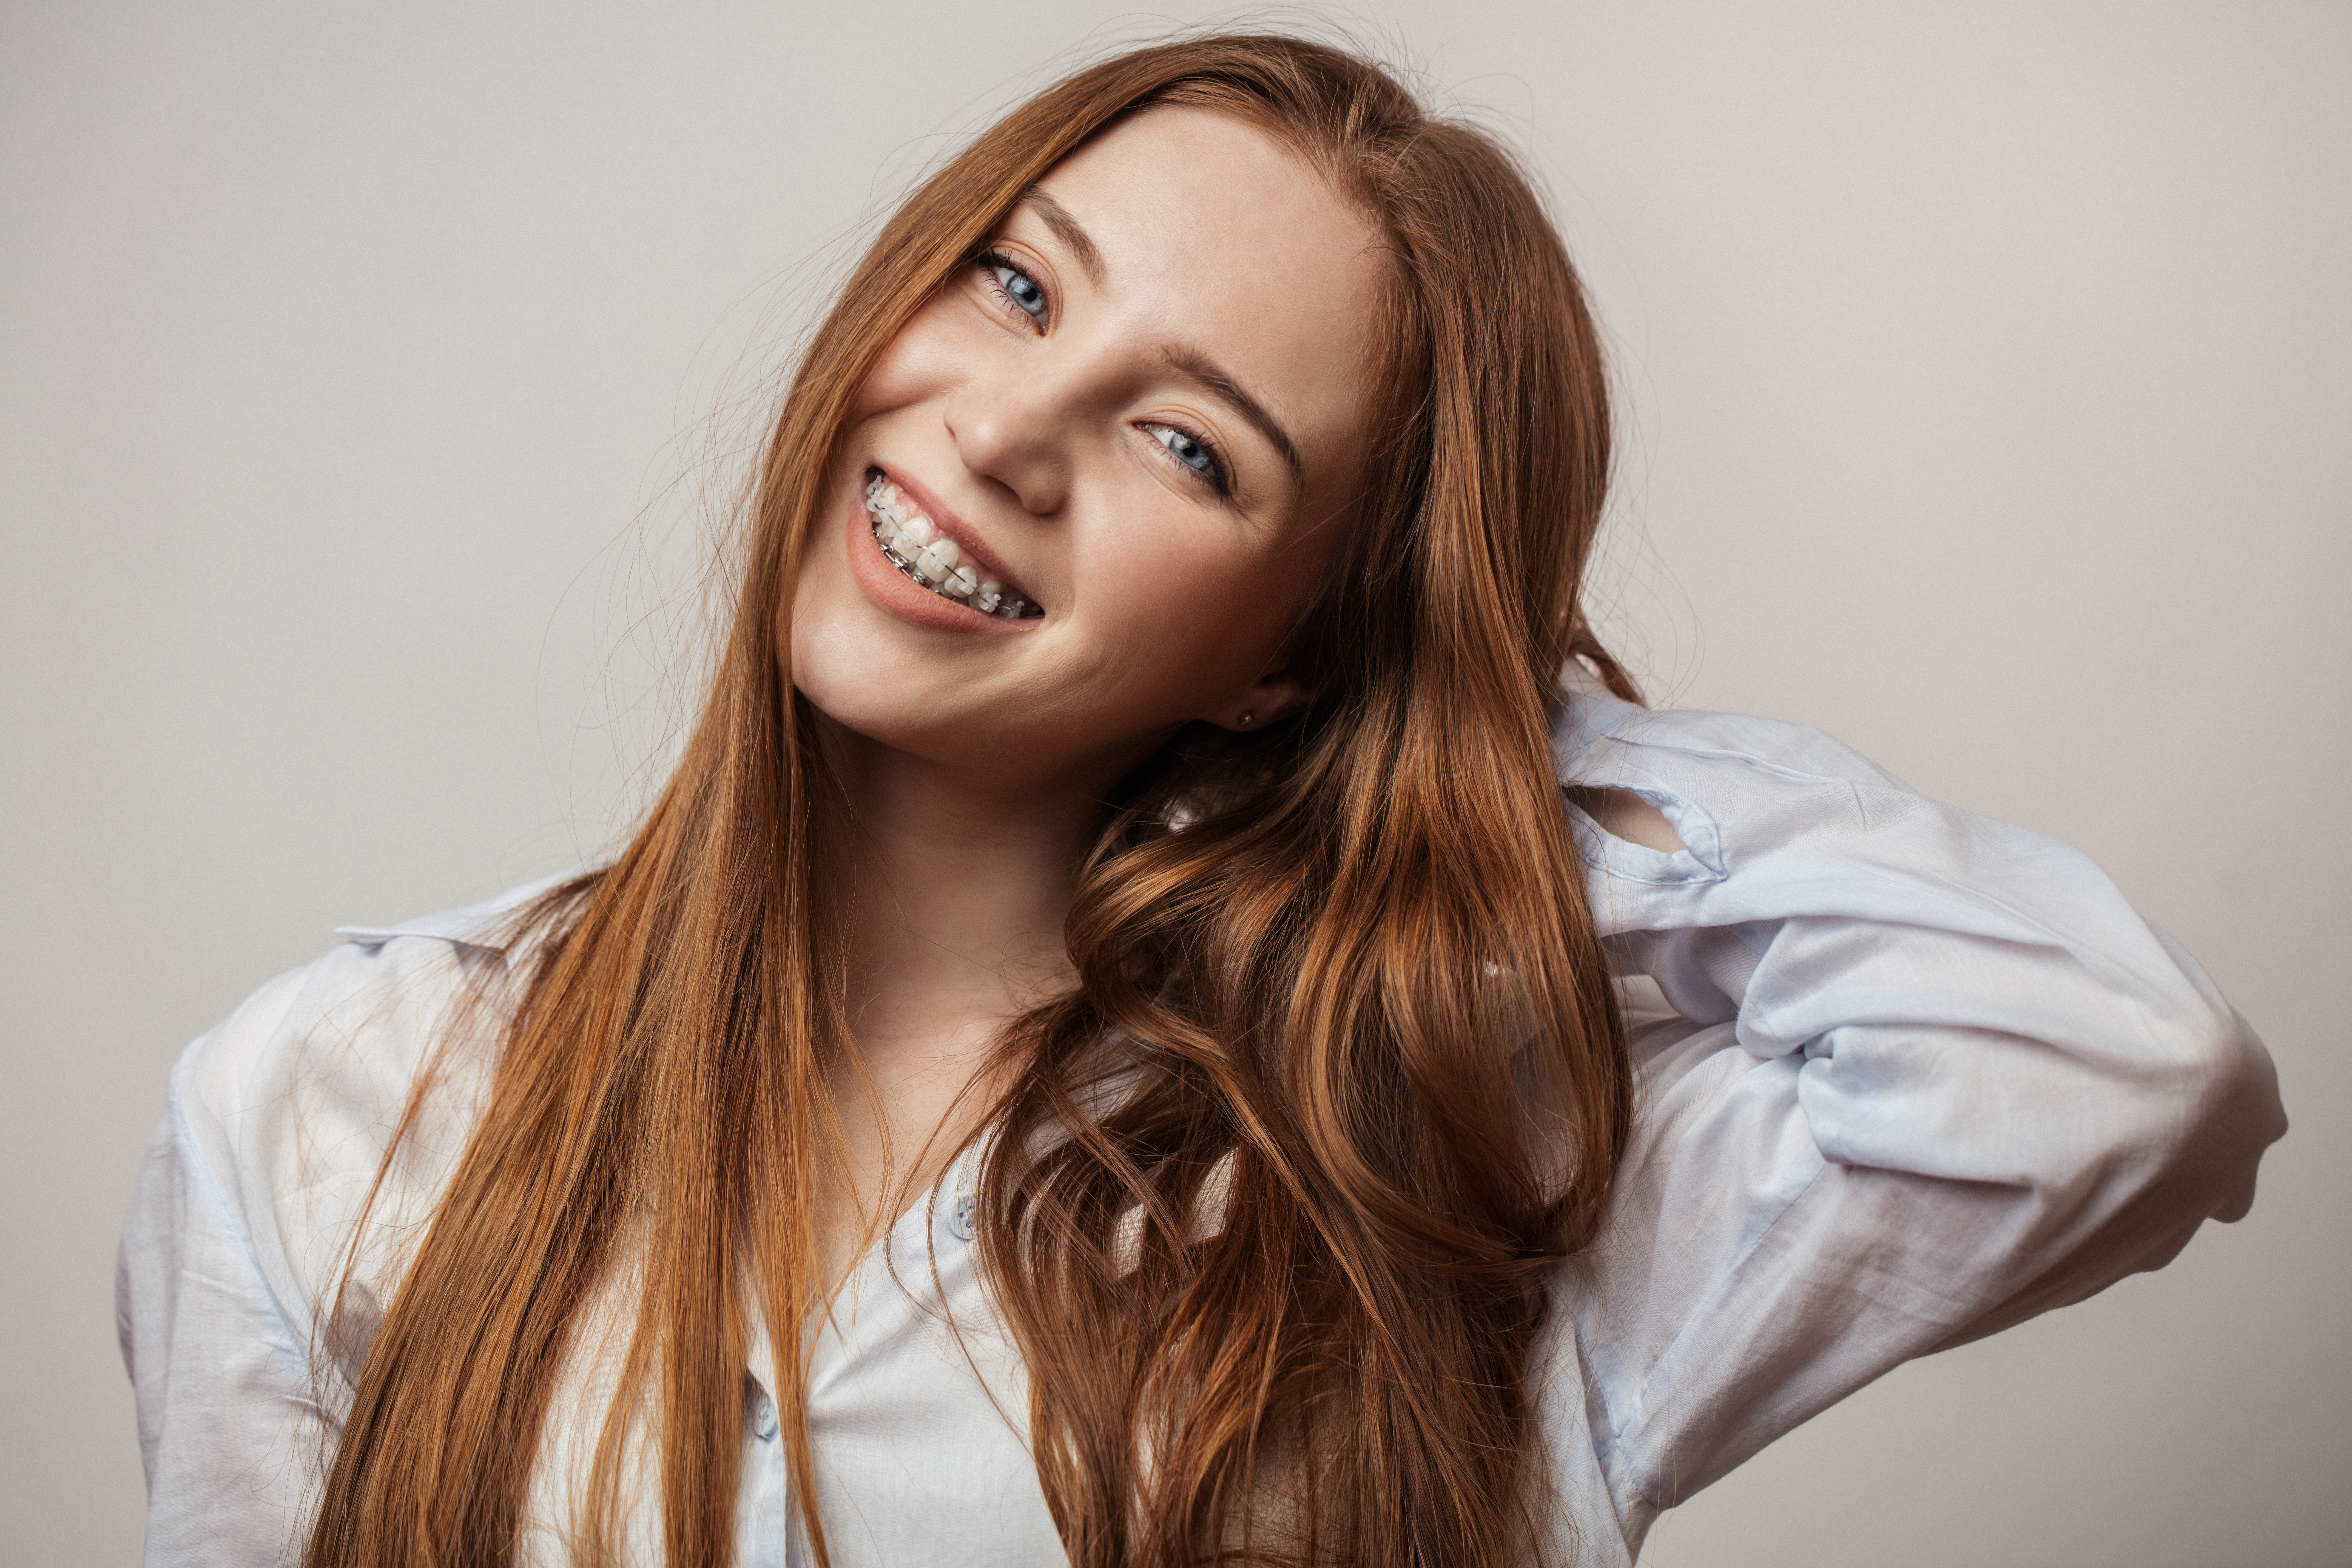 Traditional Braces: Exploring the Pros and Cons at Roos Orthodontics